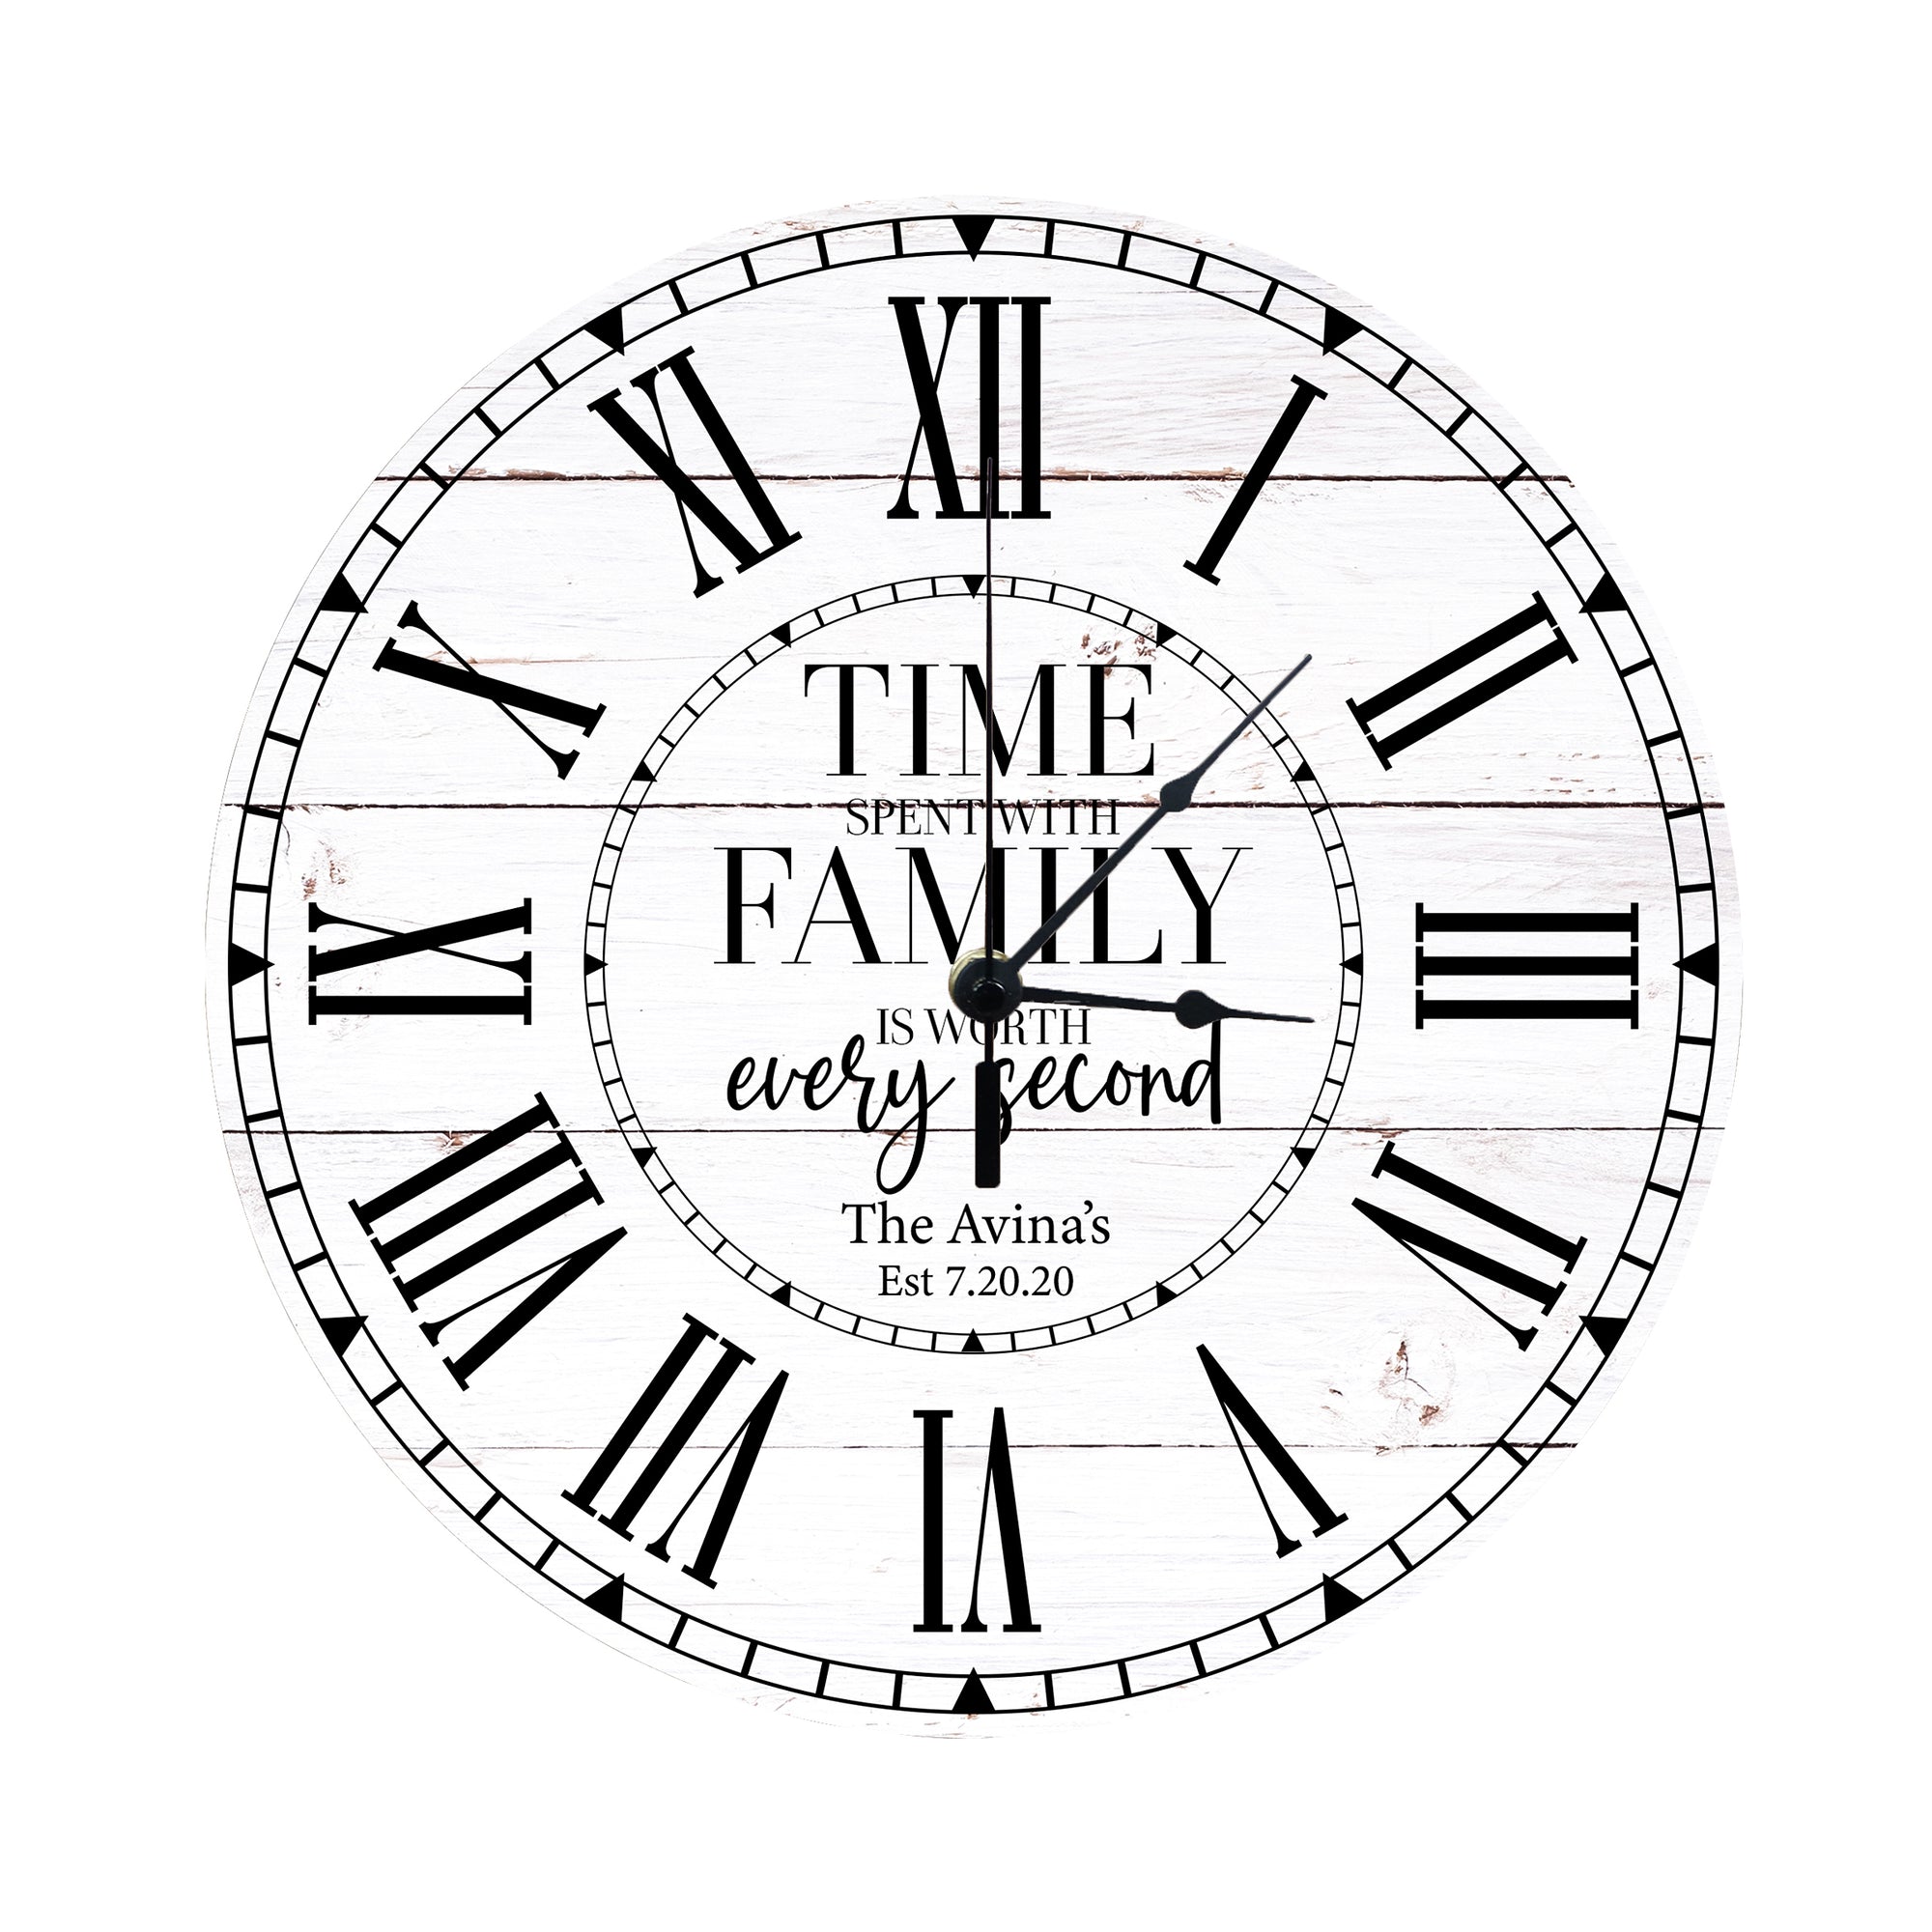 Lifesong Milestones Personalized Inspirational 12” Everyday Home and Family Wall Clock - (The Family). Wooden Decoration for Wedding, Anniversary Gift for Couples, Parents, Him, Her, Husband, Wife